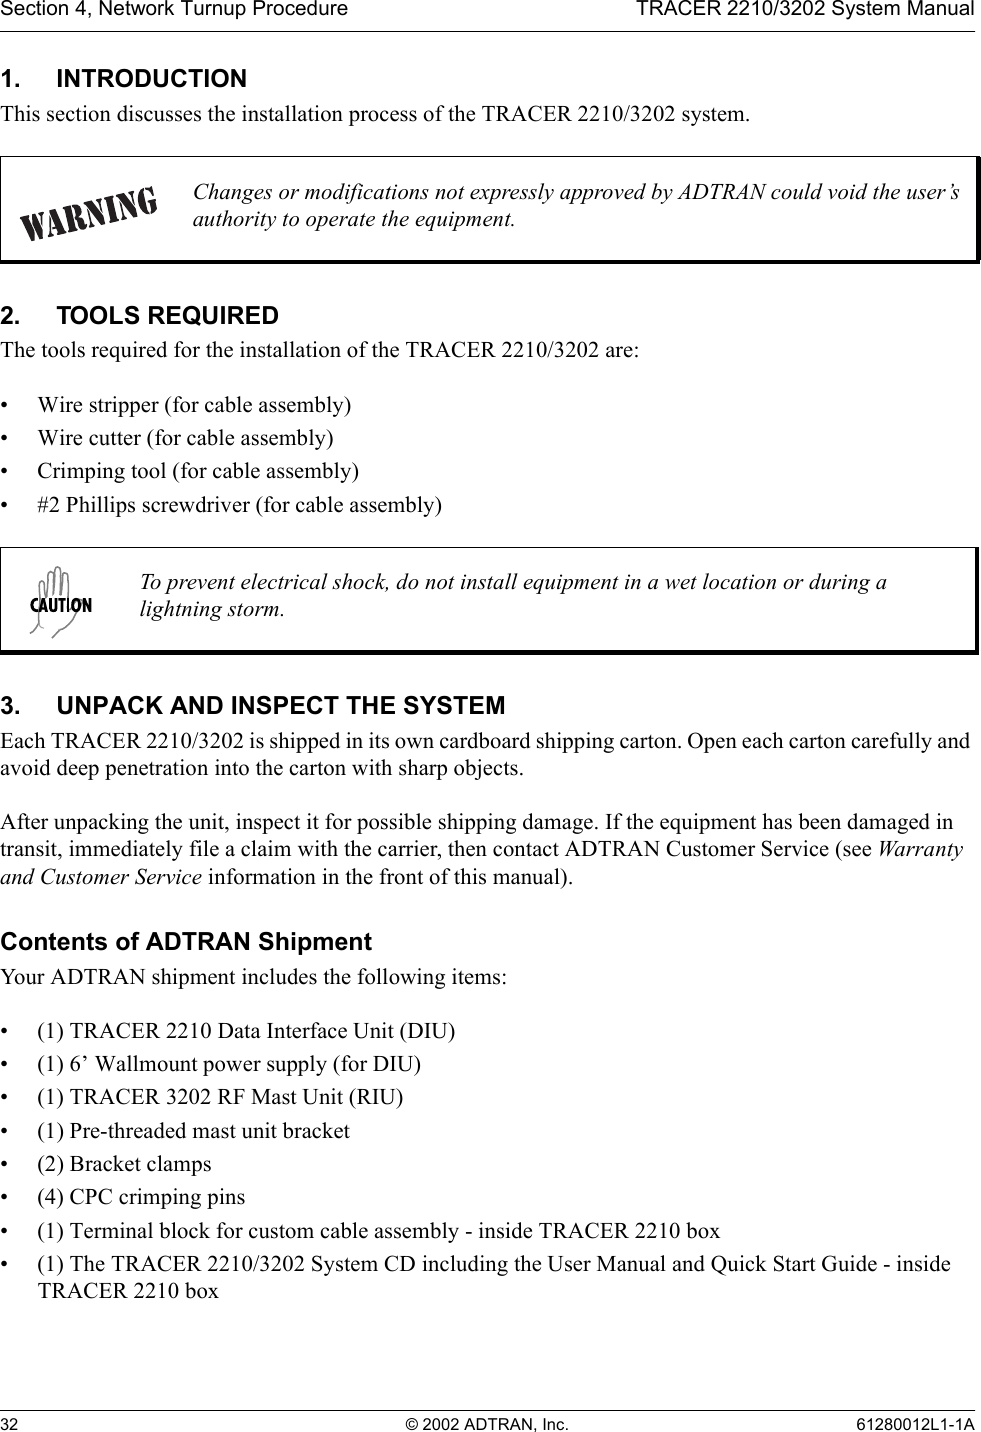 Section 4, Network Turnup Procedure TRACER 2210/3202 System Manual32 © 2002 ADTRAN, Inc. 61280012L1-1A1. INTRODUCTIONThis section discusses the installation process of the TRACER 2210/3202 system.2. TOOLS REQUIREDThe tools required for the installation of the TRACER 2210/3202 are:• Wire stripper (for cable assembly)• Wire cutter (for cable assembly)• Crimping tool (for cable assembly)• #2 Phillips screwdriver (for cable assembly)3. UNPACK AND INSPECT THE SYSTEMEach TRACER 2210/3202 is shipped in its own cardboard shipping carton. Open each carton carefully and avoid deep penetration into the carton with sharp objects. After unpacking the unit, inspect it for possible shipping damage. If the equipment has been damaged in transit, immediately file a claim with the carrier, then contact ADTRAN Customer Service (see Warranty and Customer Service information in the front of this manual).Contents of ADTRAN ShipmentYour ADTRAN shipment includes the following items:• (1) TRACER 2210 Data Interface Unit (DIU)• (1) 6’ Wallmount power supply (for DIU)• (1) TRACER 3202 RF Mast Unit (RIU)• (1) Pre-threaded mast unit bracket • (2) Bracket clamps• (4) CPC crimping pins• (1) Terminal block for custom cable assembly - inside TRACER 2210 box• (1) The TRACER 2210/3202 System CD including the User Manual and Quick Start Guide - inside TRACER 2210 boxChanges or modifications not expressly approved by ADTRAN could void the user’s authority to operate the equipment.To prevent electrical shock, do not install equipment in a wet location or during a lightning storm.